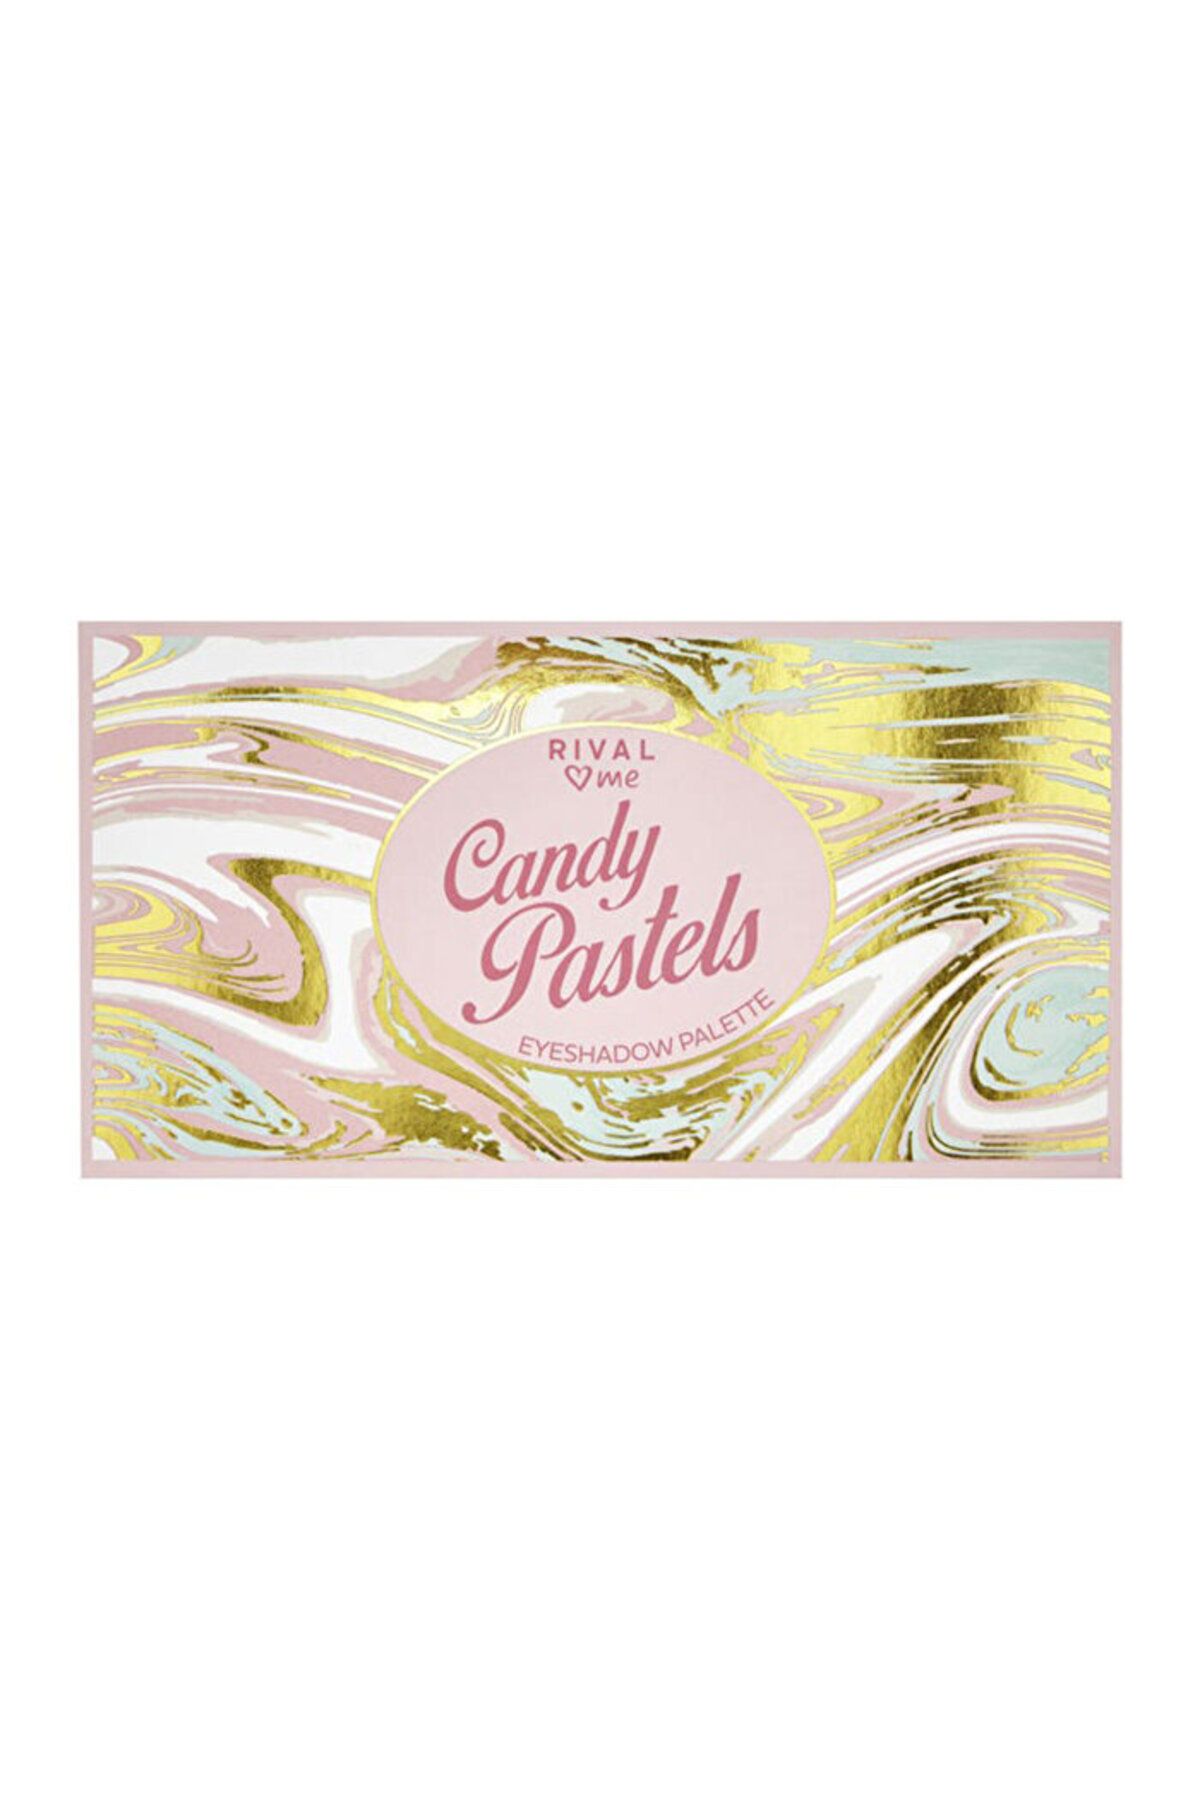 Rival Loves Me Far Paleti - No:02 Latest Candy Pastels - 14 g